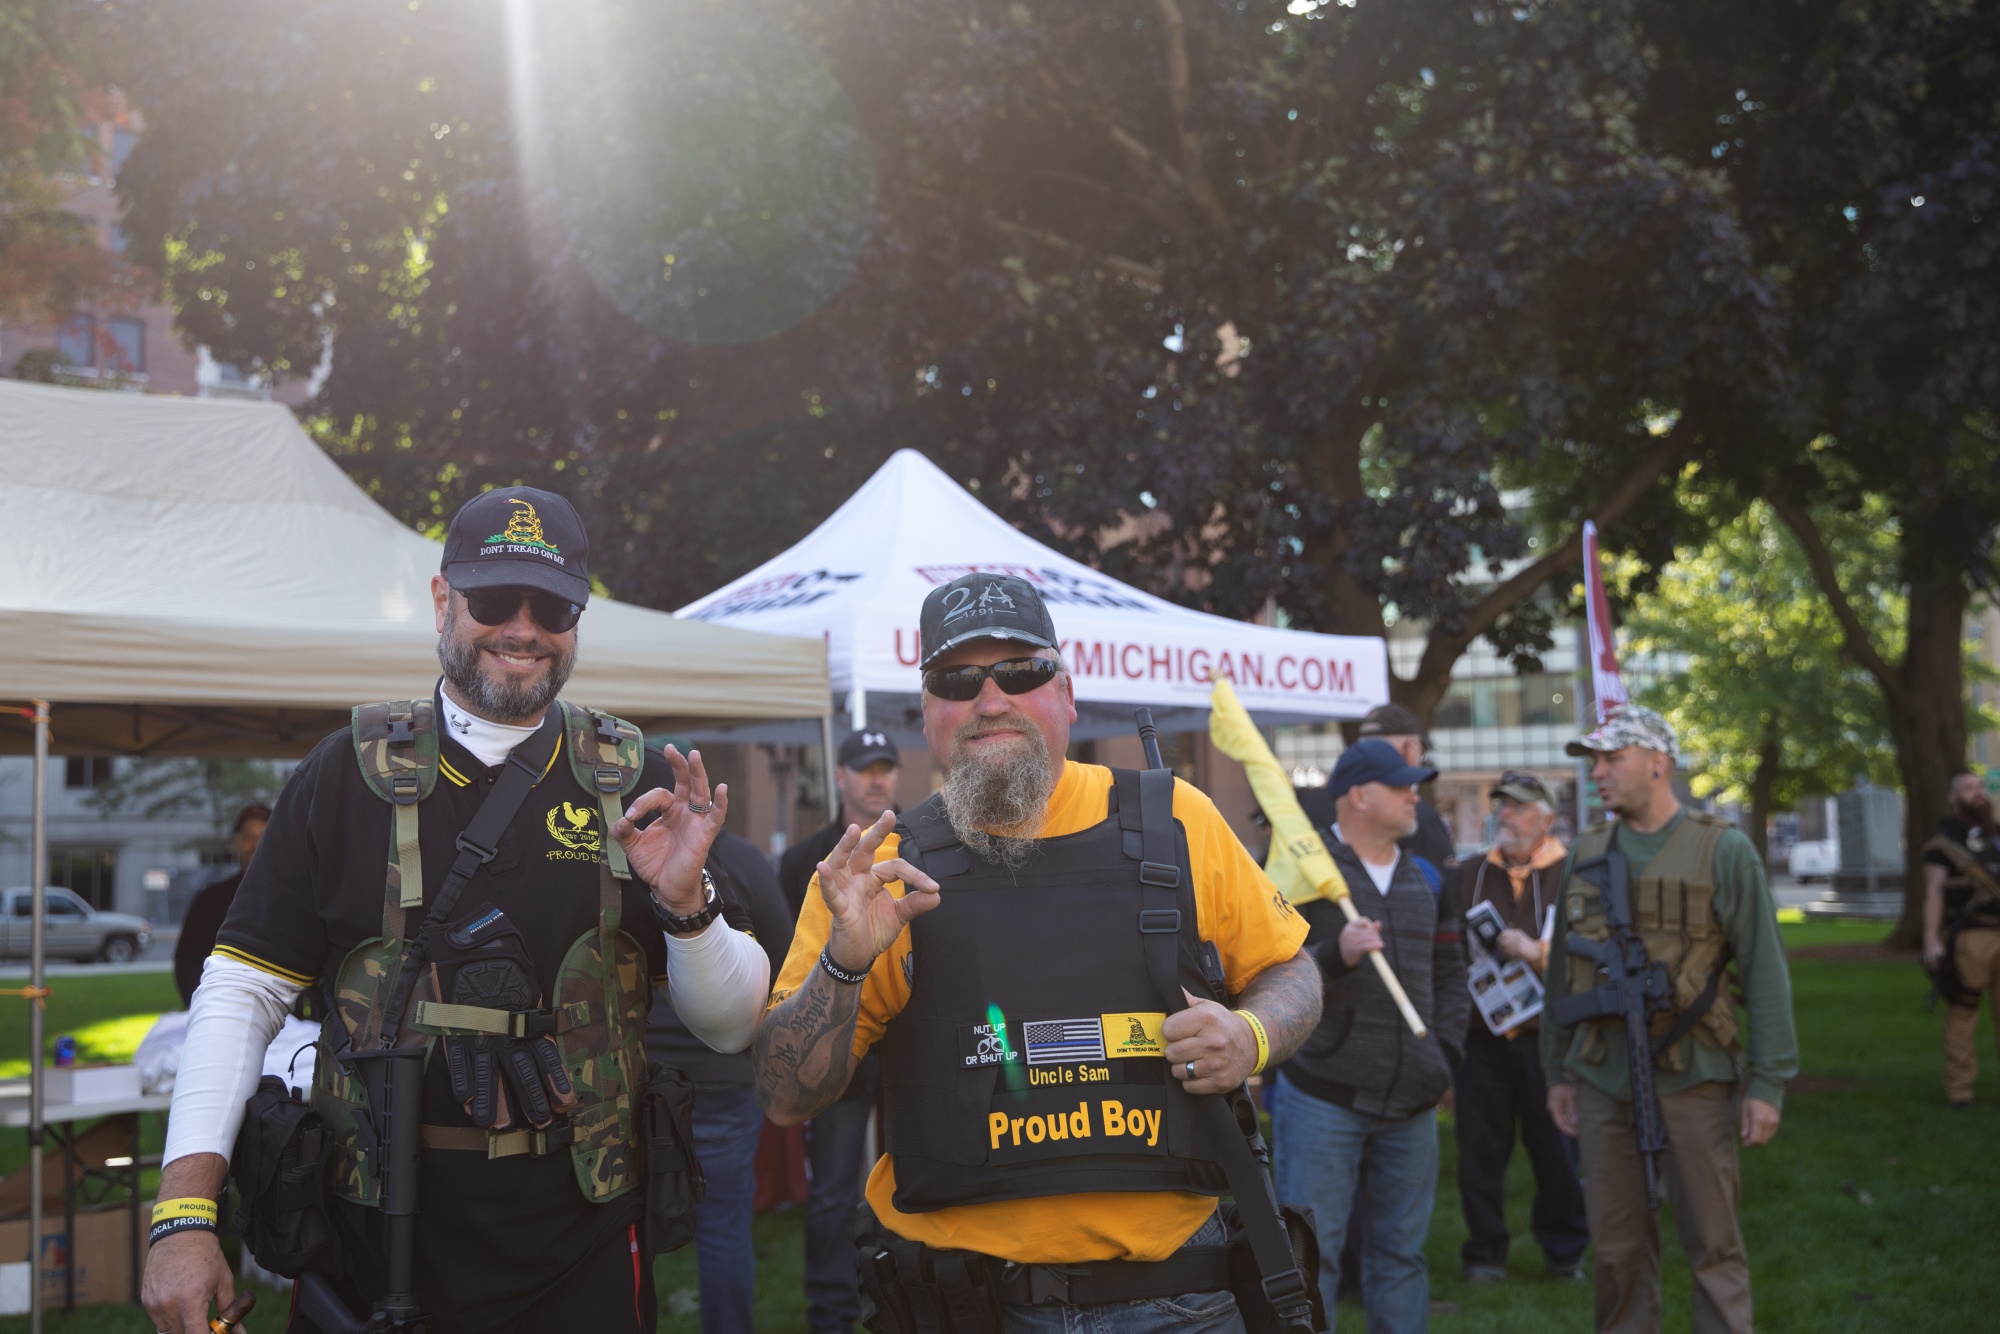 Demonstrators who identify as Proud Boys gesture during a Second Amendment March in Lansing, Michigan, U.S., on&nbsp;Sept. 17.